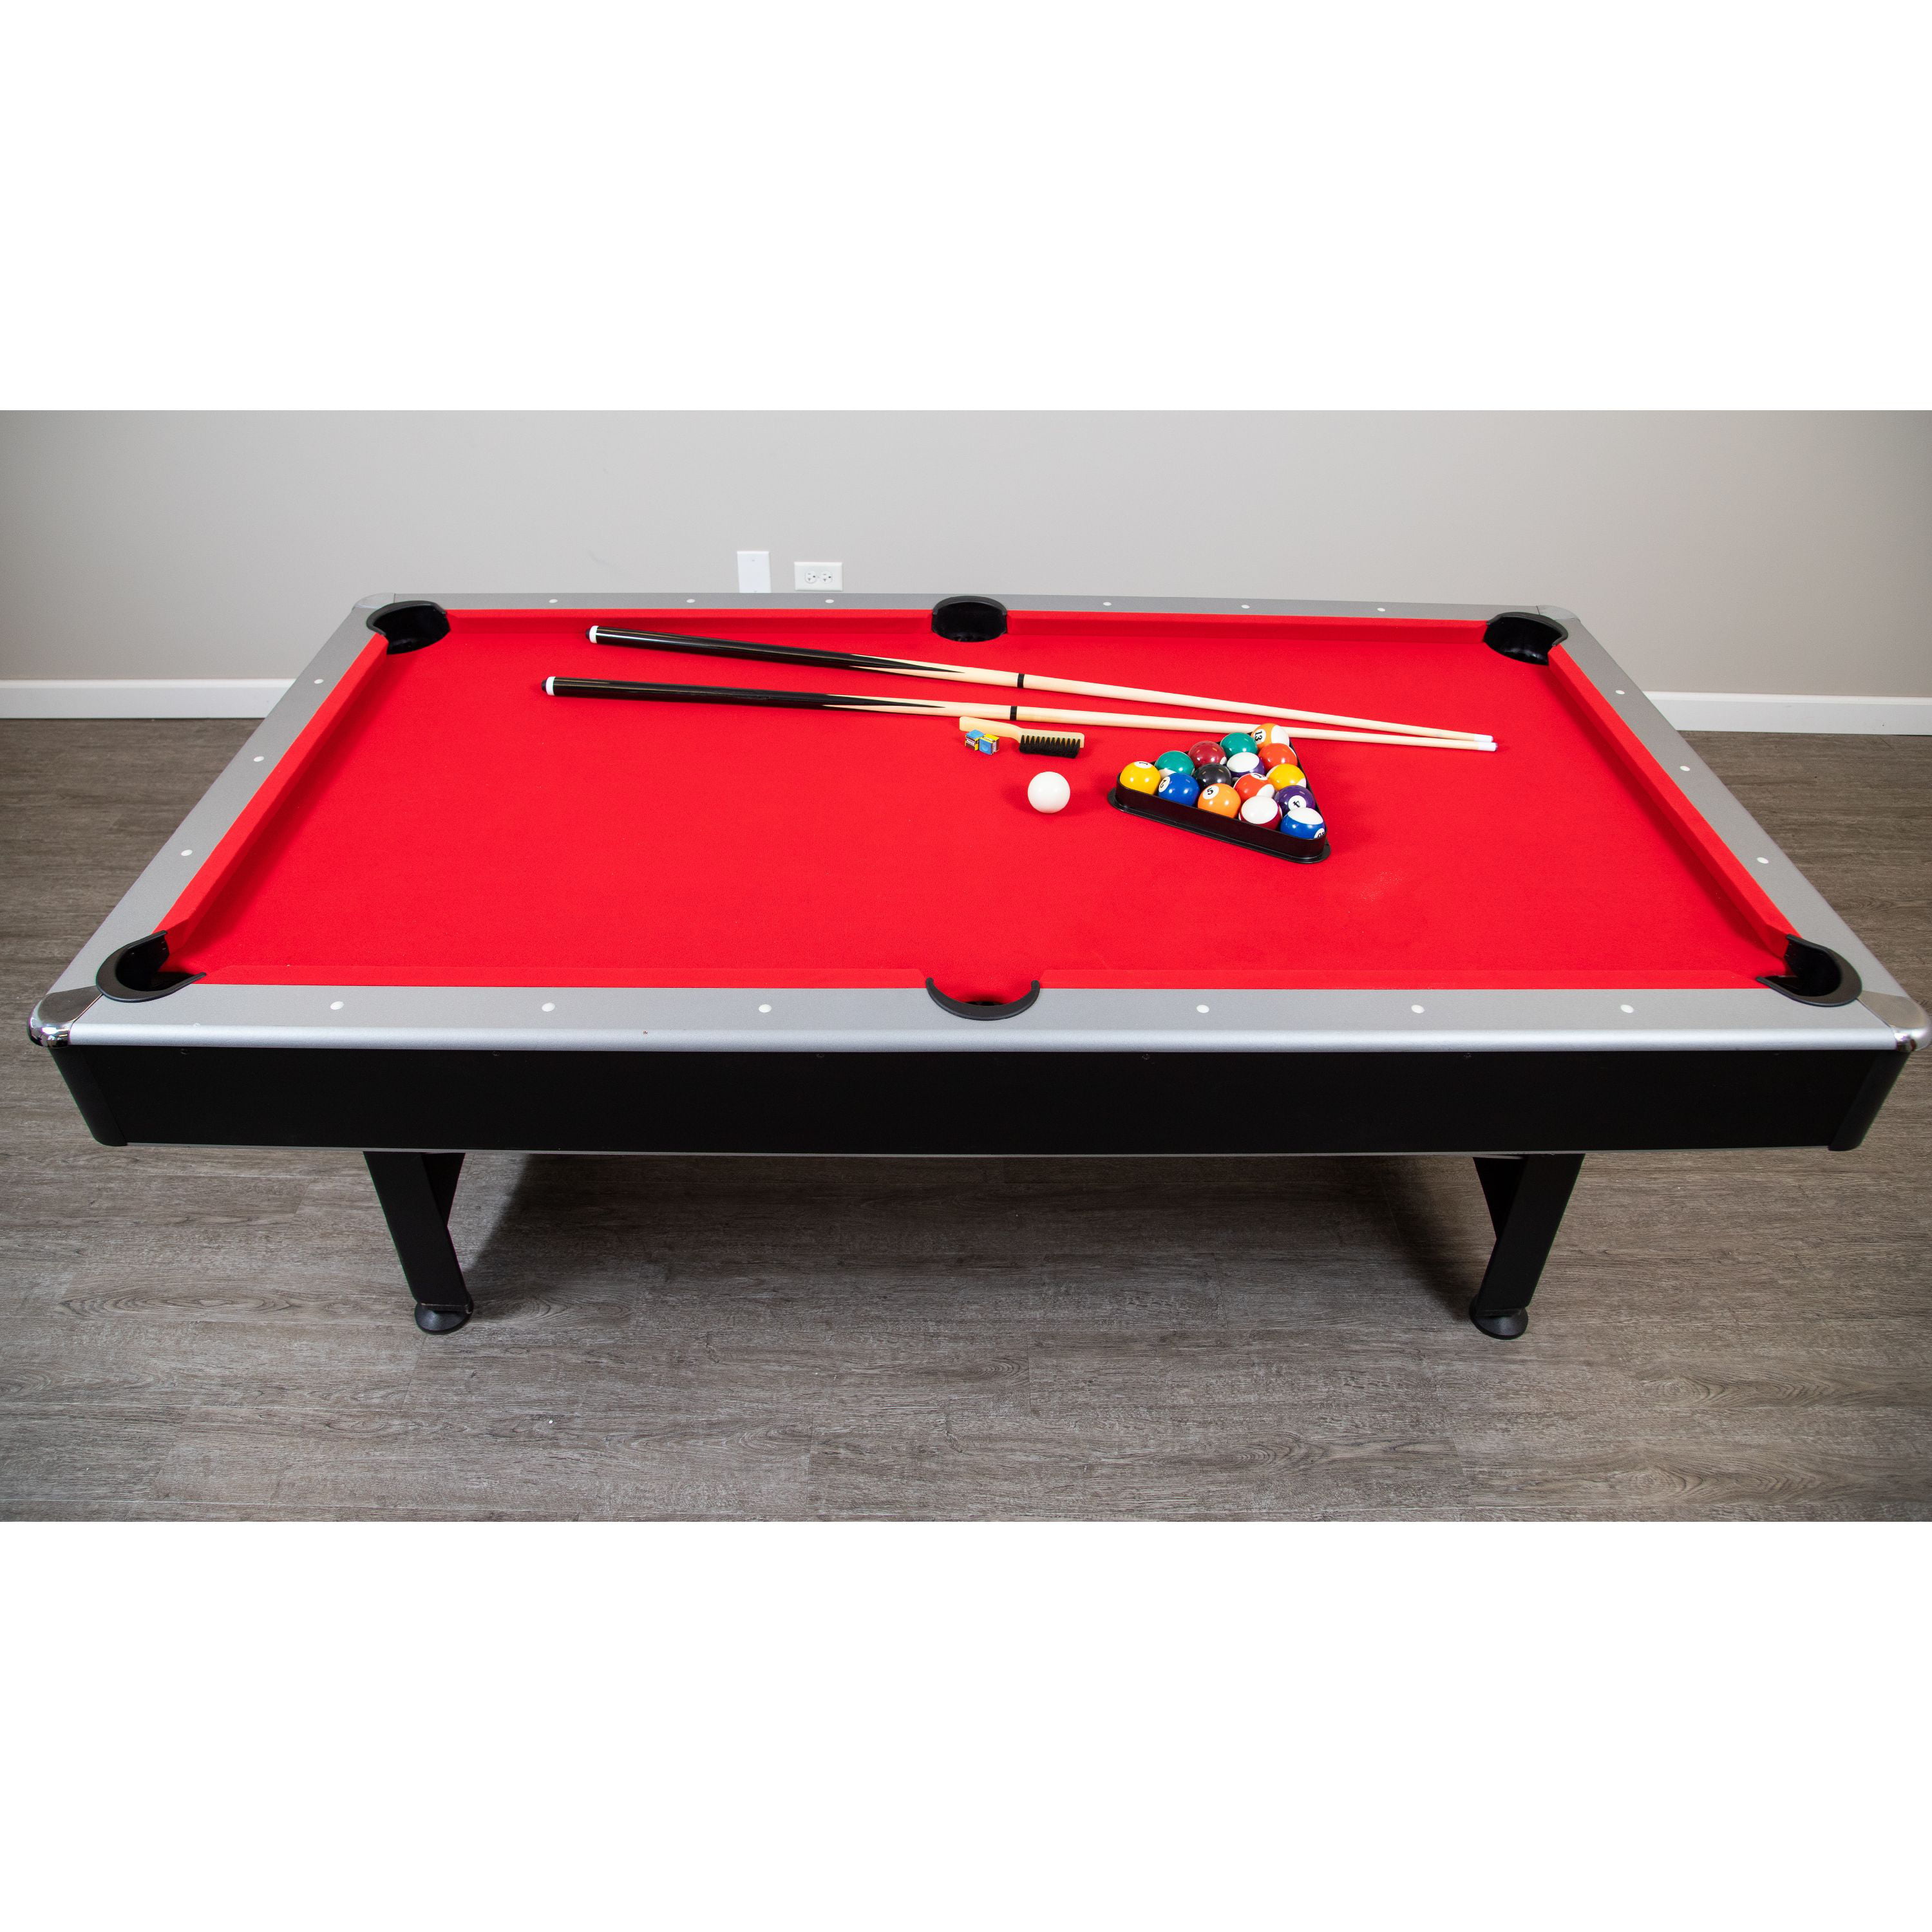 Hathaway Matrix 54'' 7-in-1 Multi Game Table – Pro Pool Store